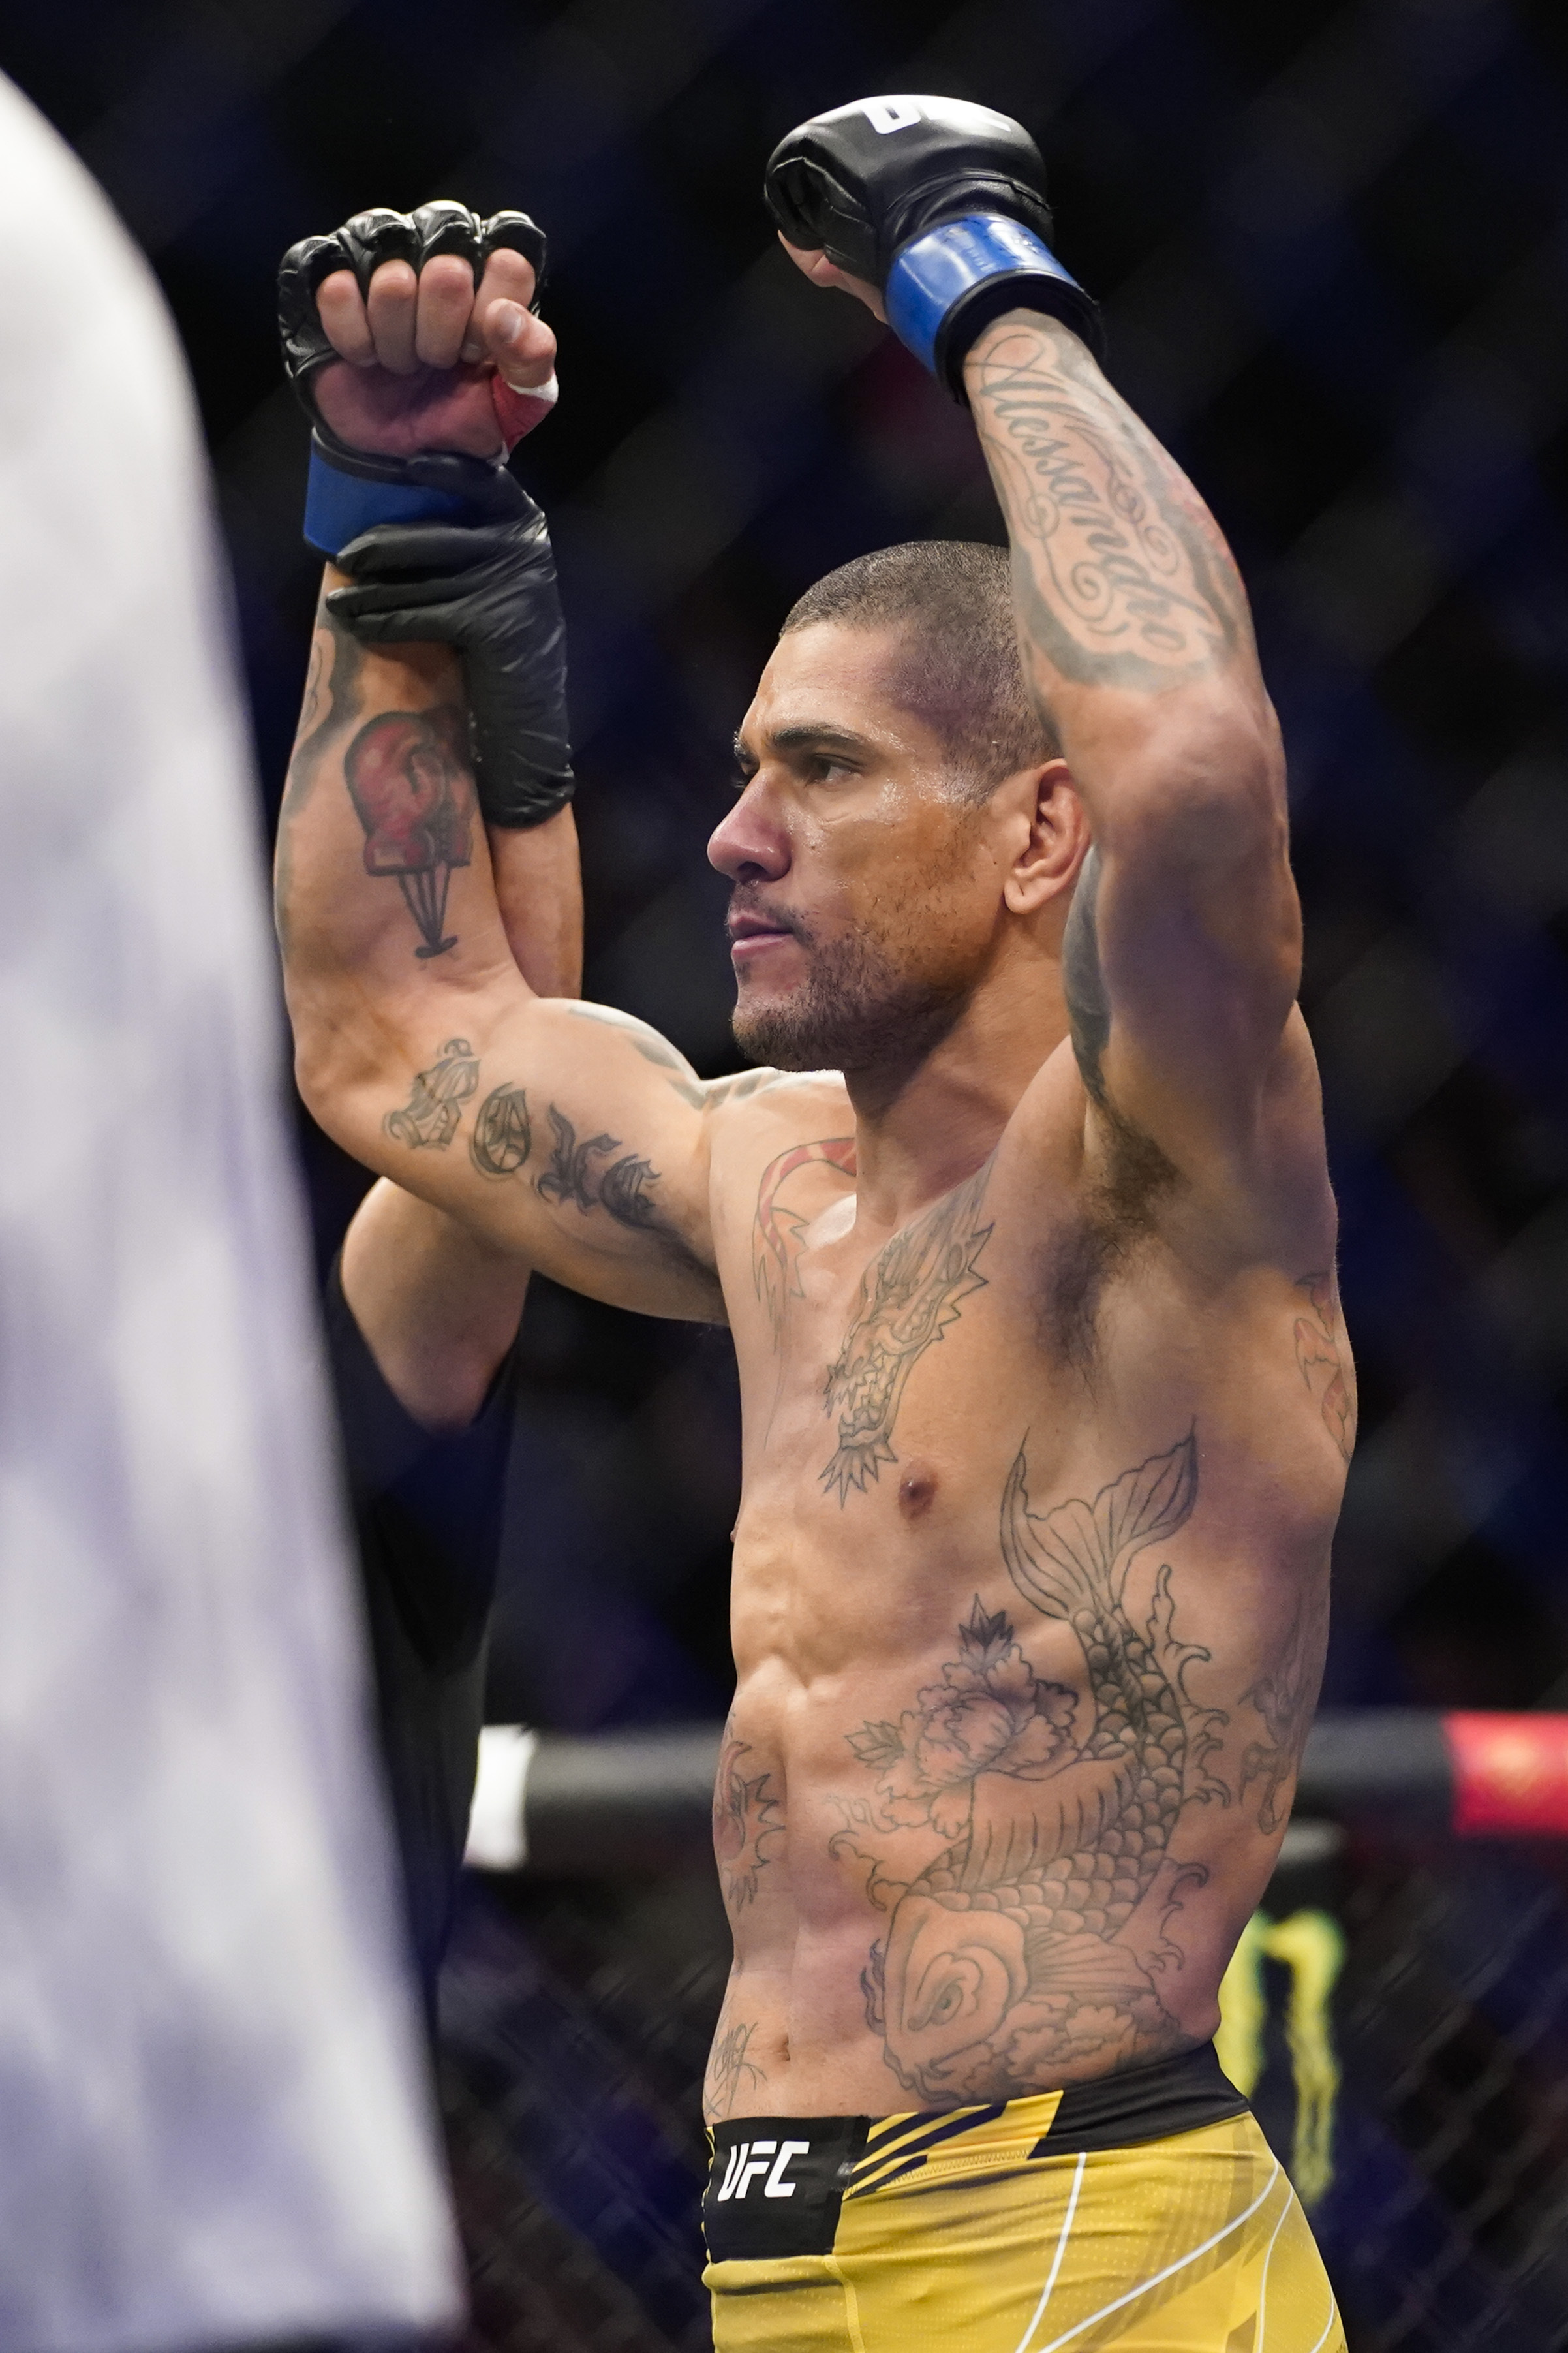 UFC 276: Alex Pereira calls out Israel Adesanya after viciously knocks out Sean Strickland with brutal hook